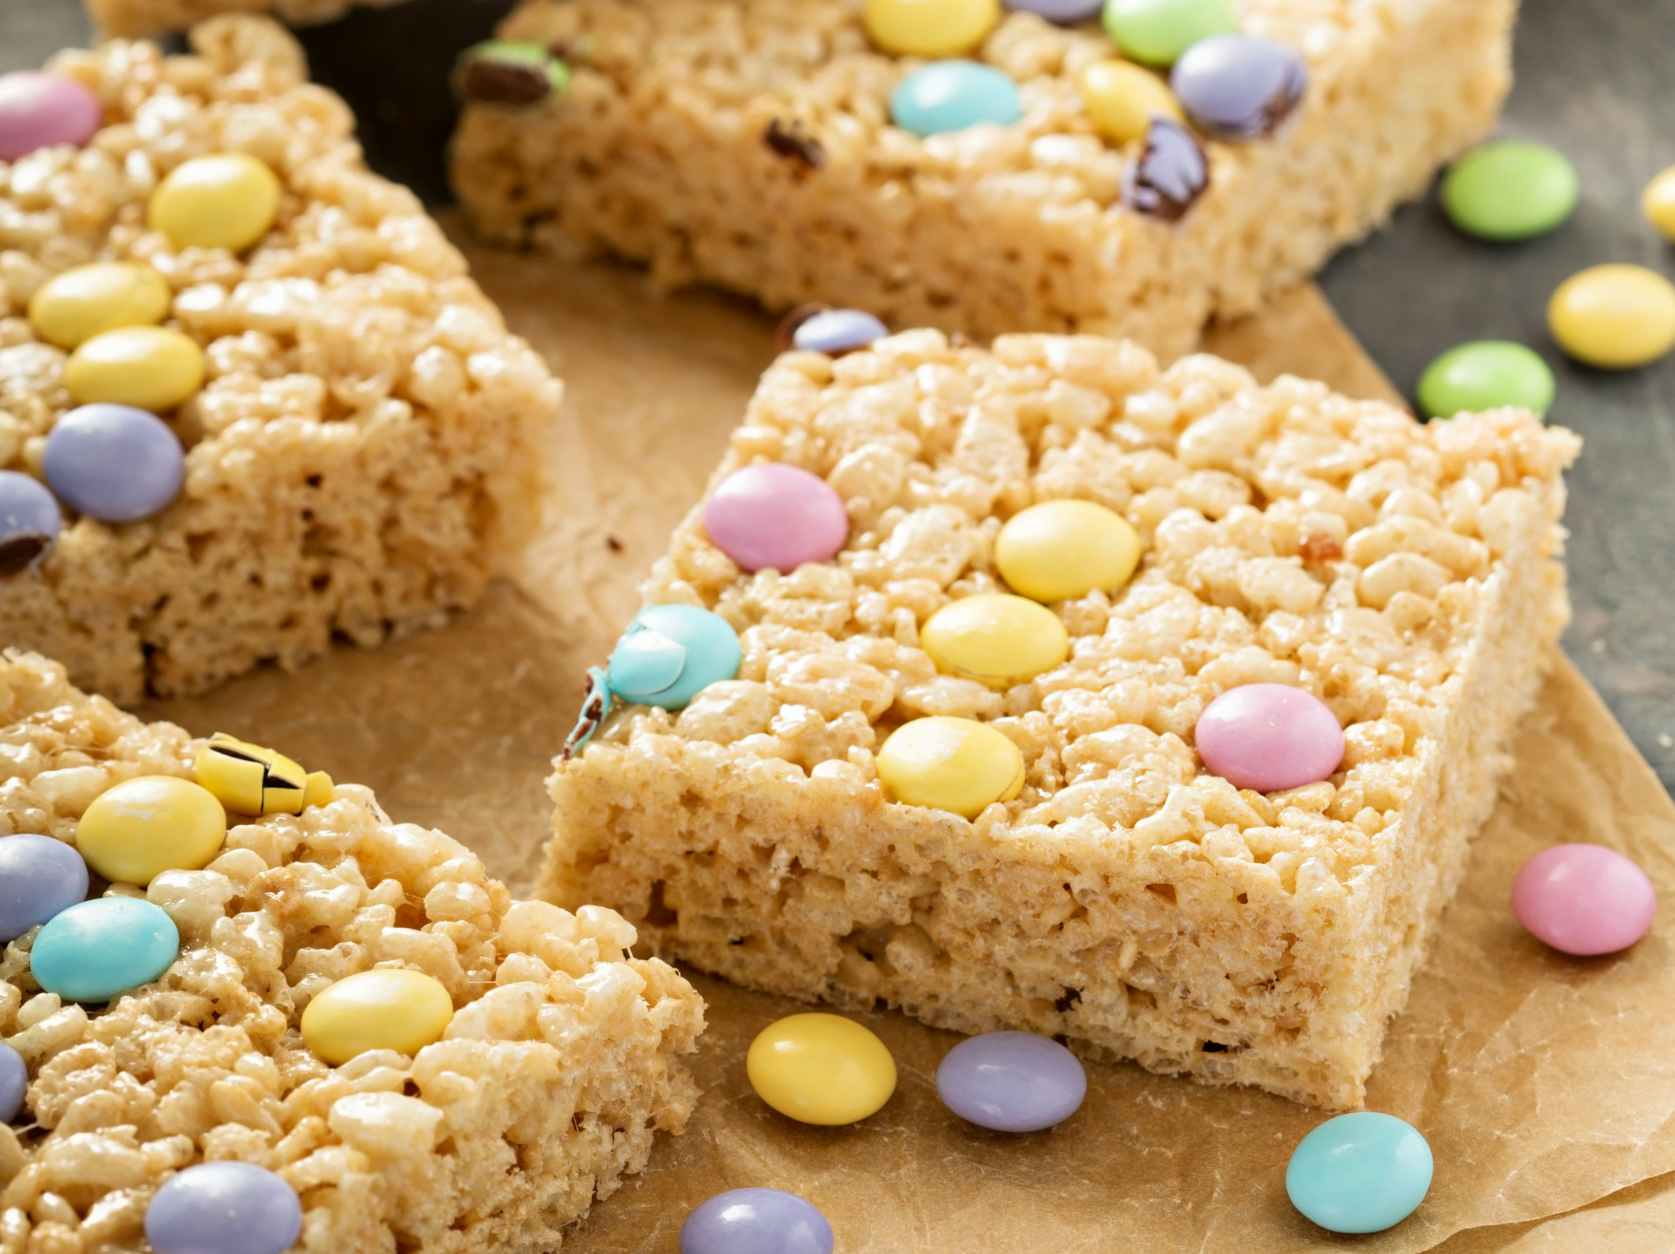 Rice krispies treats with chocolate candy on them.